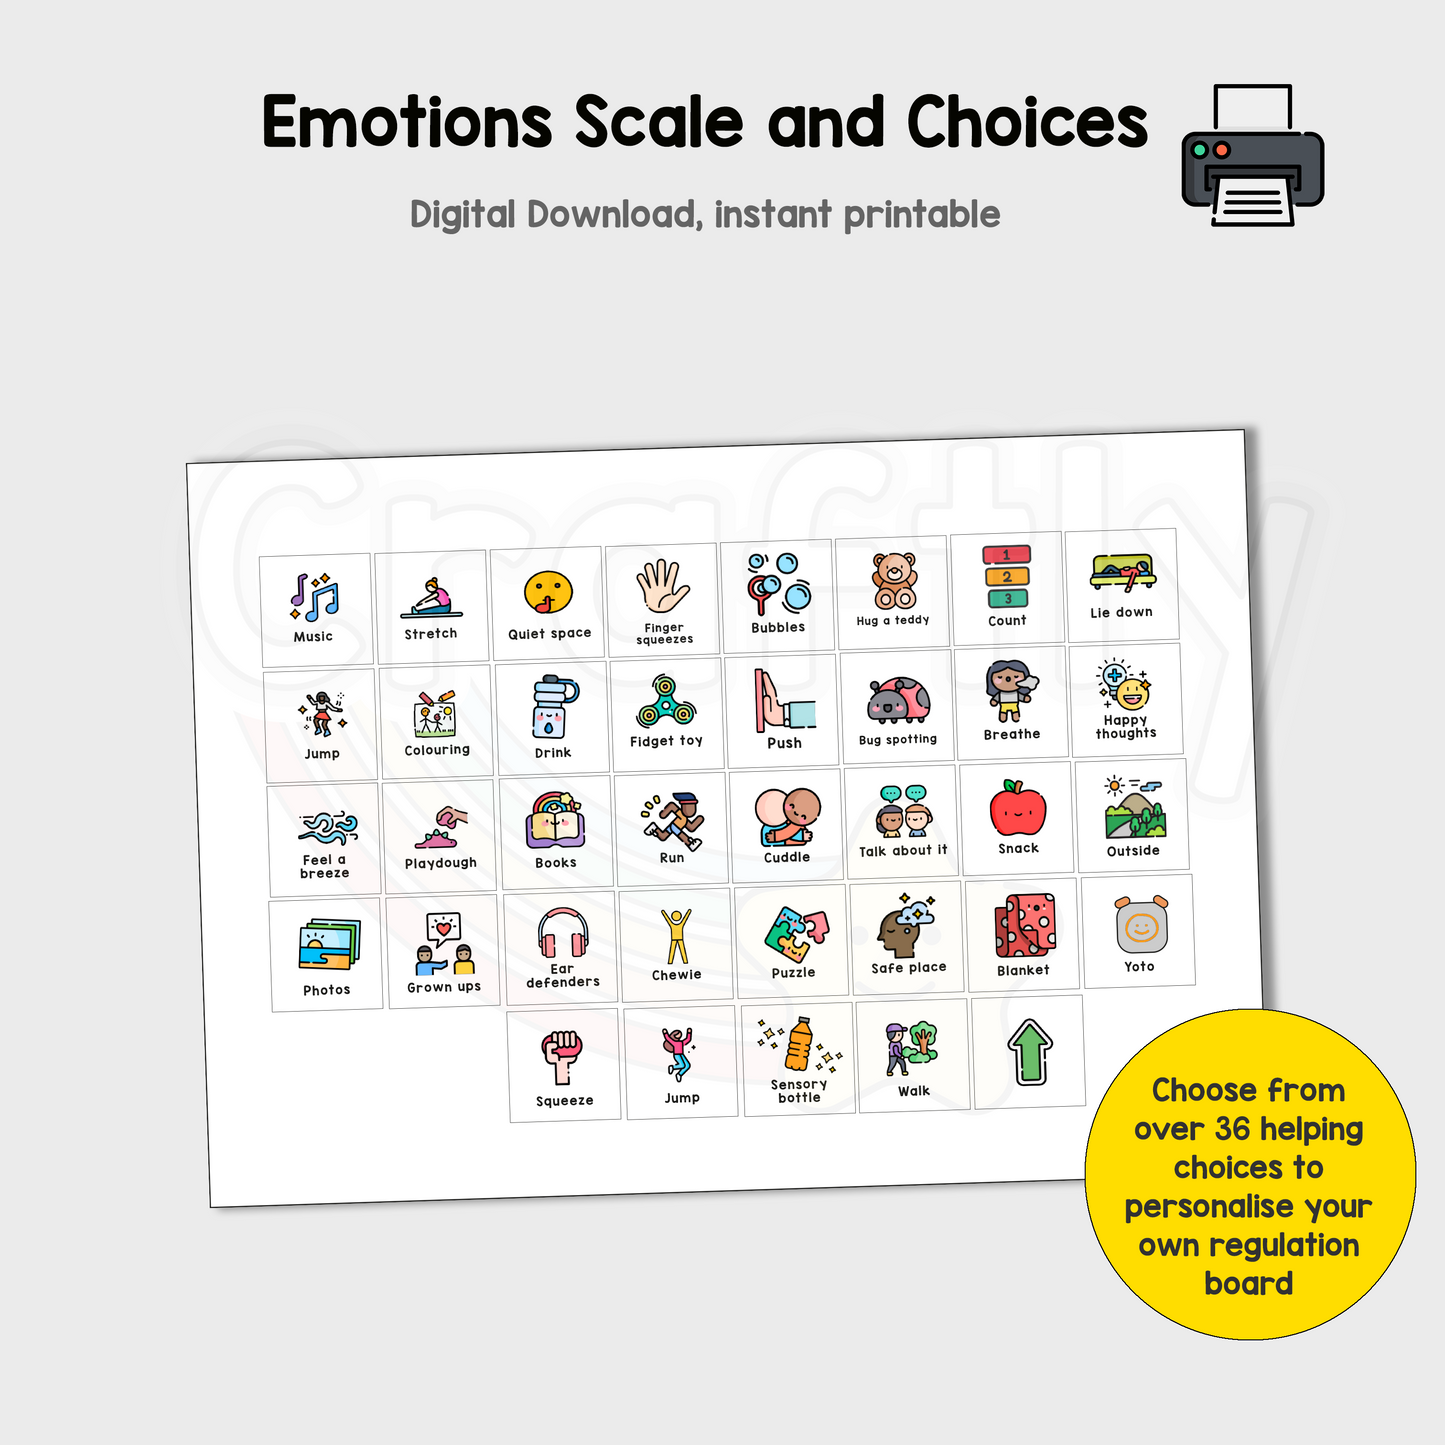 5 Point Emotions Scale and Helping Choices